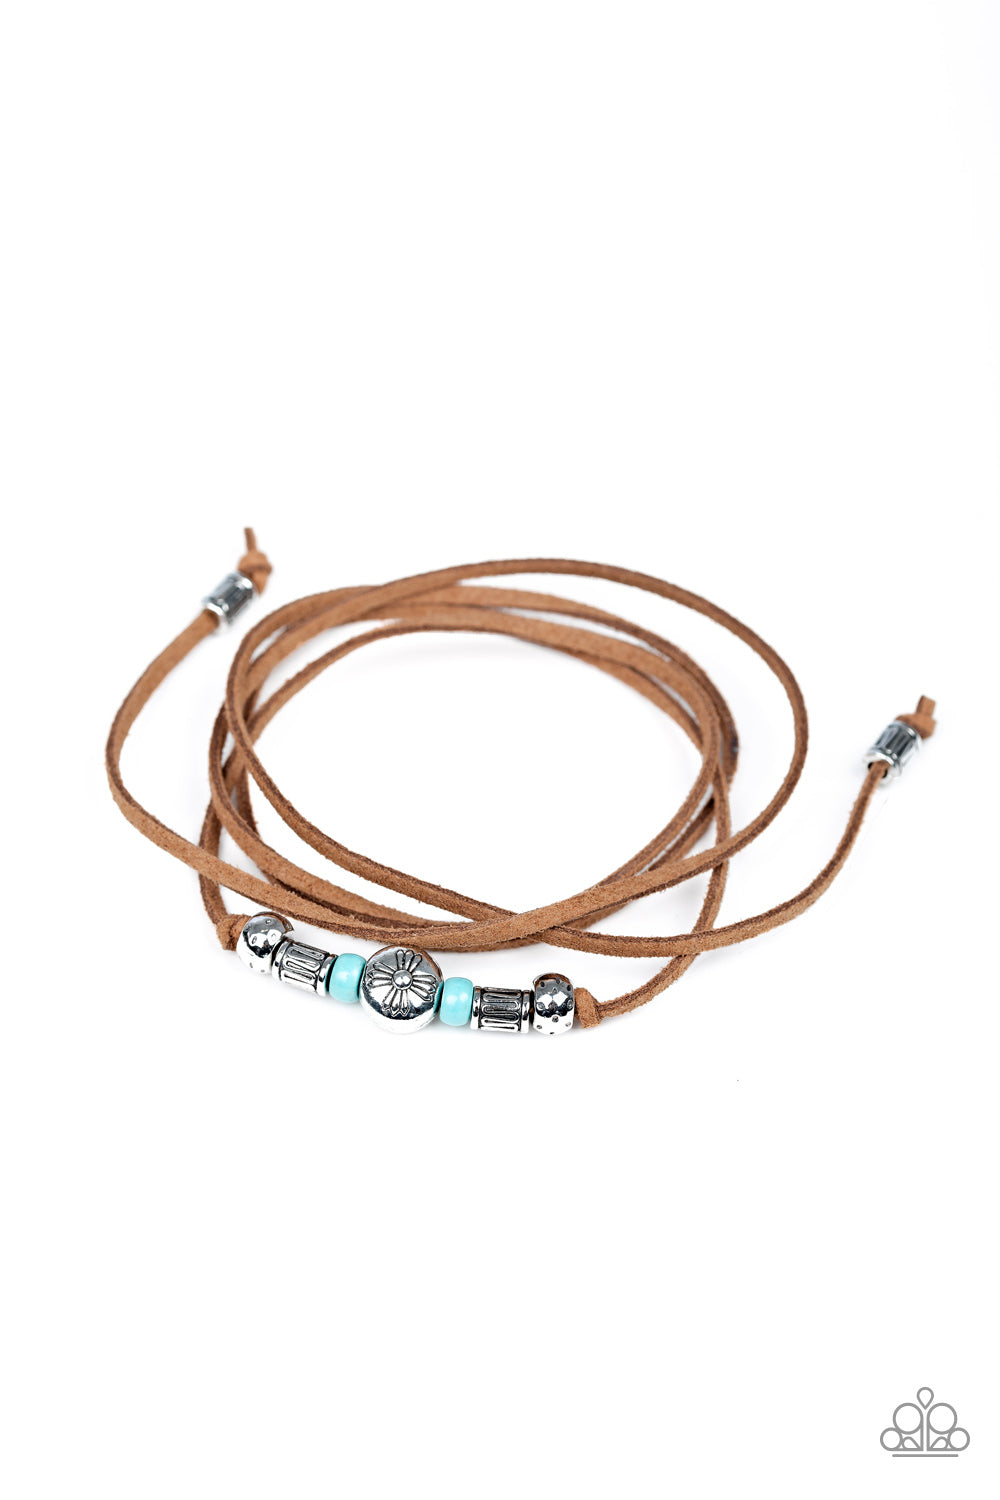 FIND YOUR WAY - BLUE BEADS LEATHER WRAP AROUND SUEDE BRACELET